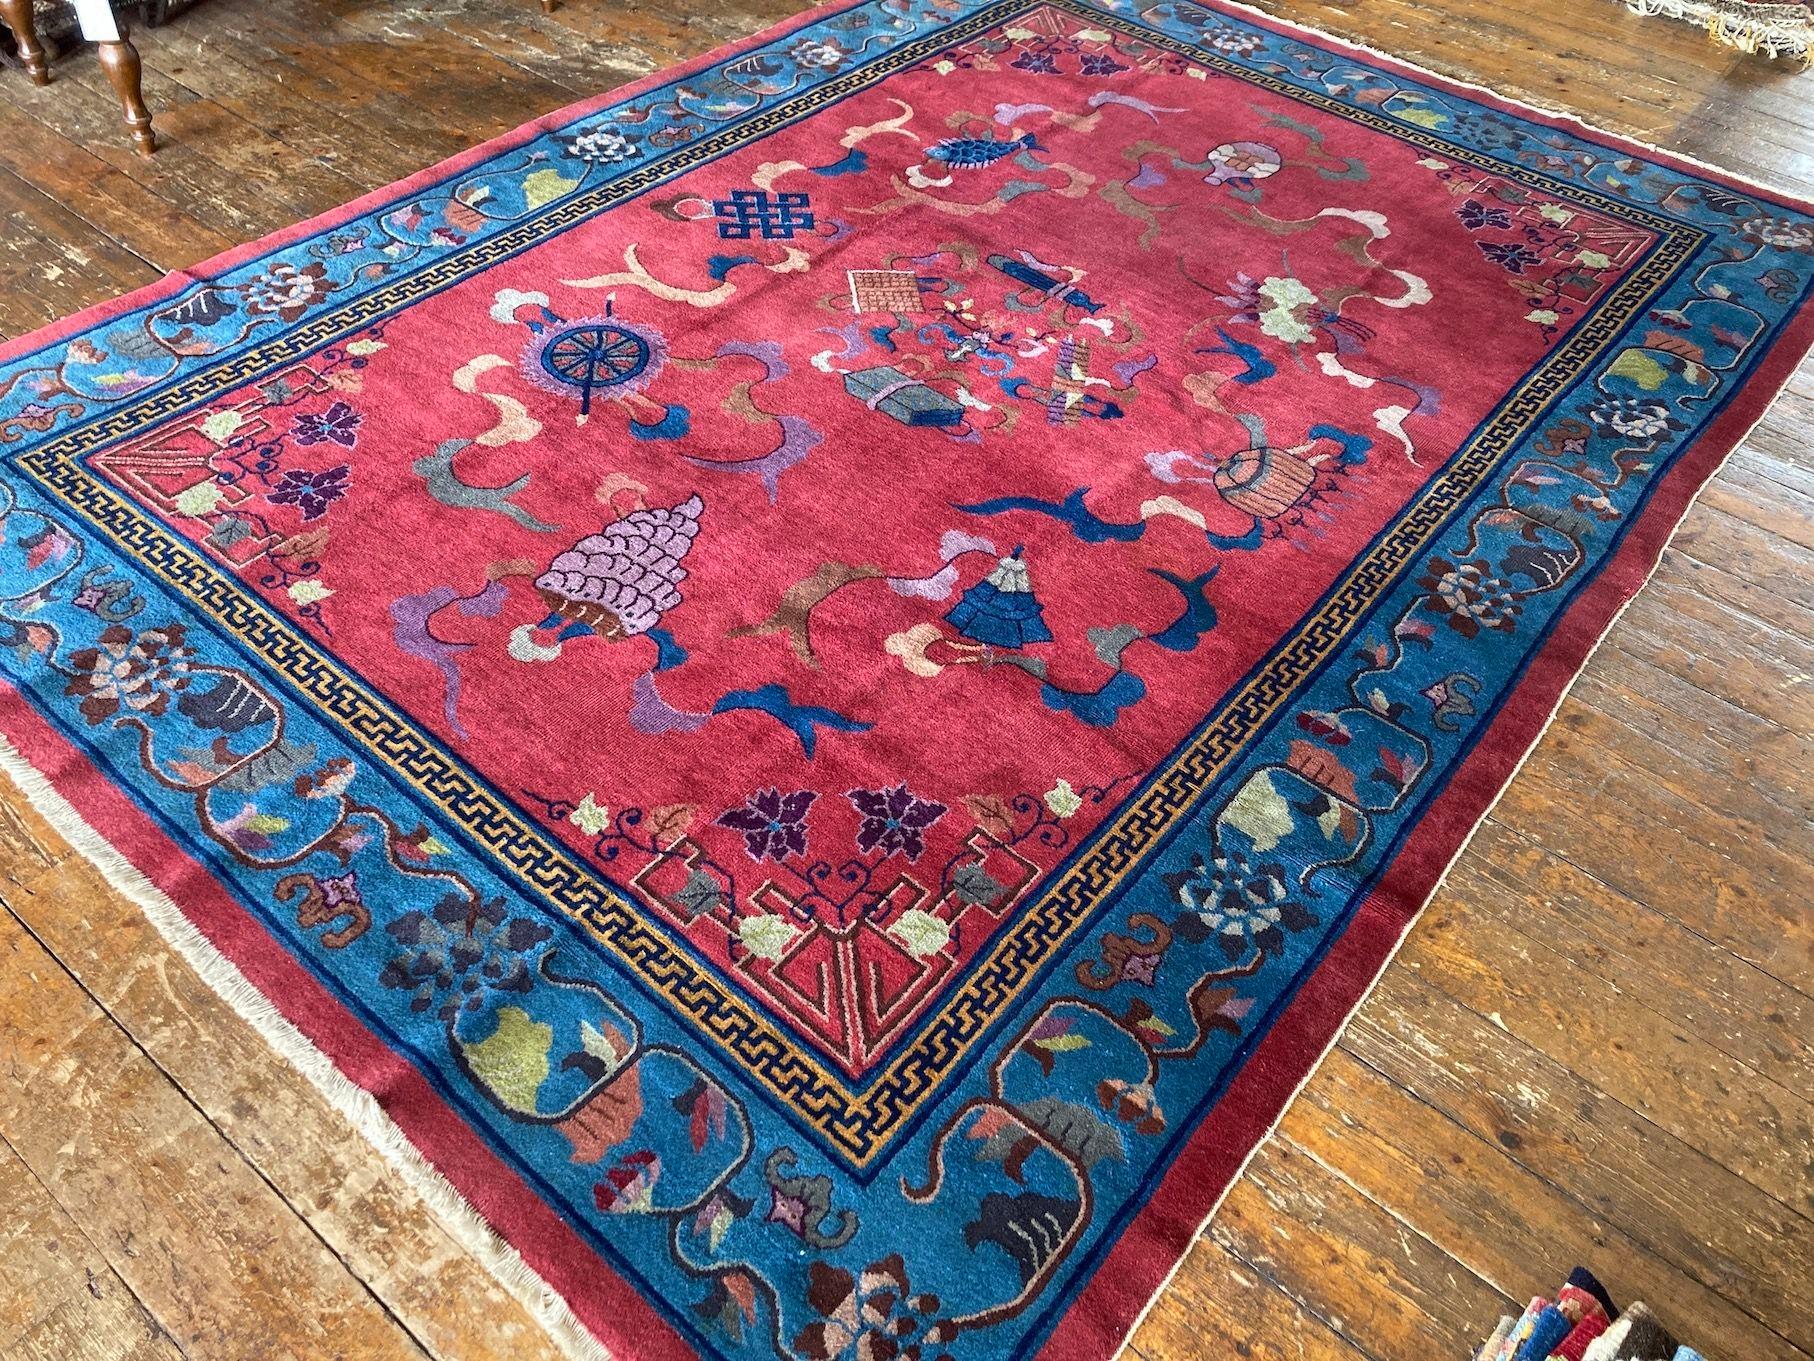 Antique Chinese Art Deco Carpet 3.02m X 2.16m In Good Condition For Sale In St. Albans, GB